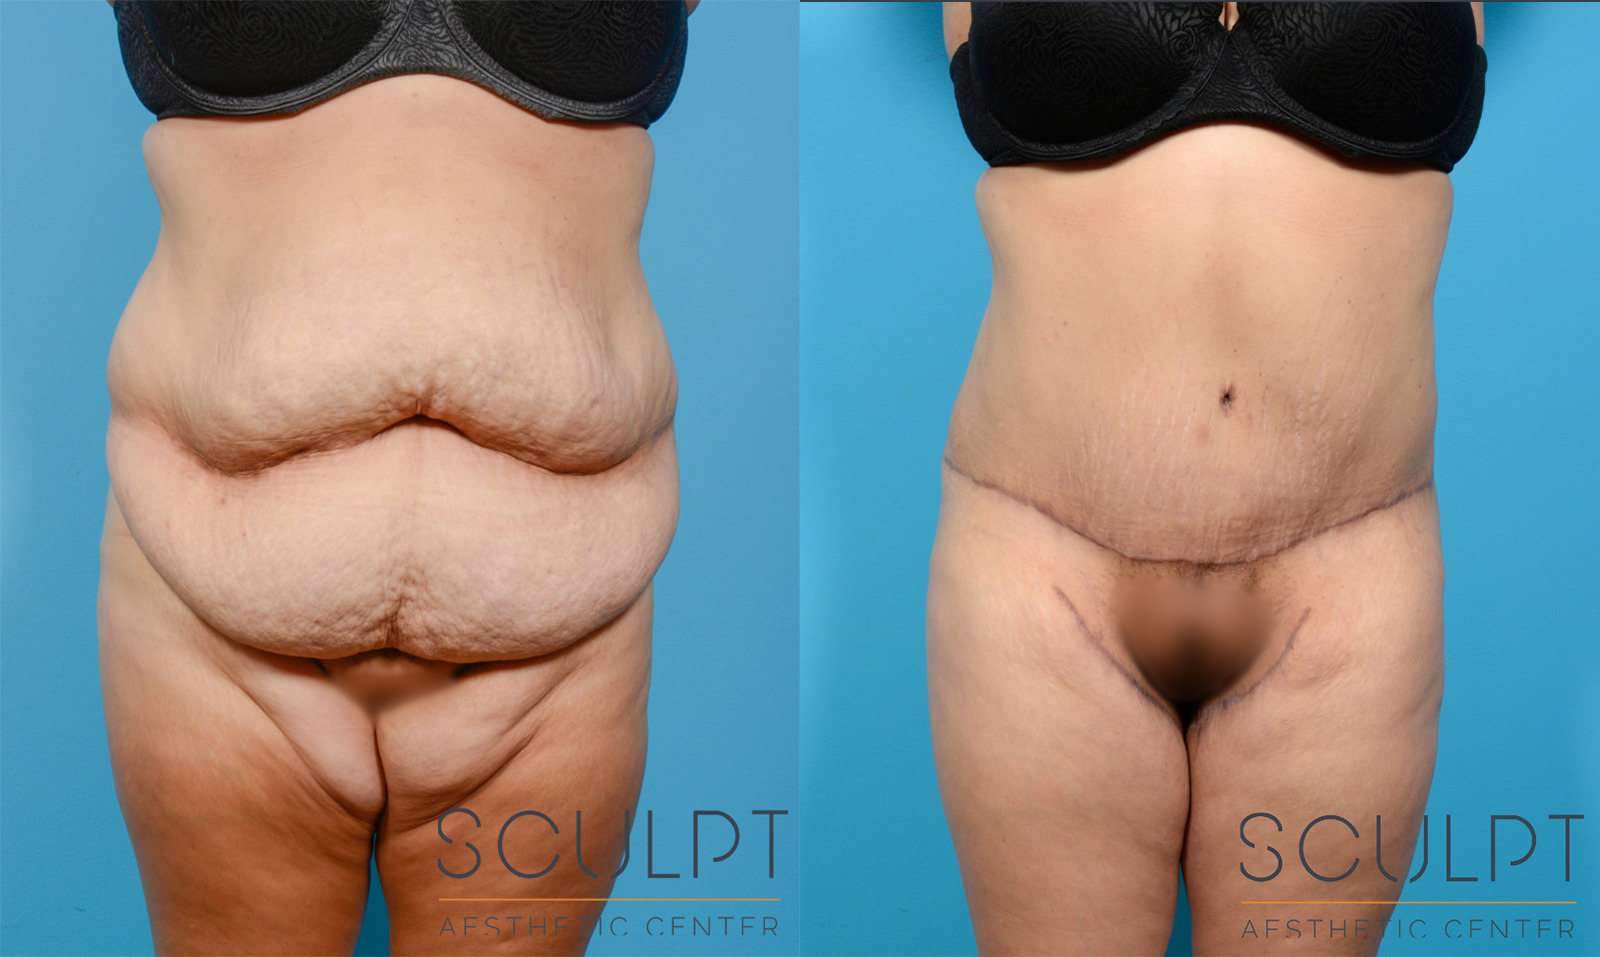 Female Thigh Lift Before and After Photo by Sculpt Aesthetic Center in Frisco, TX